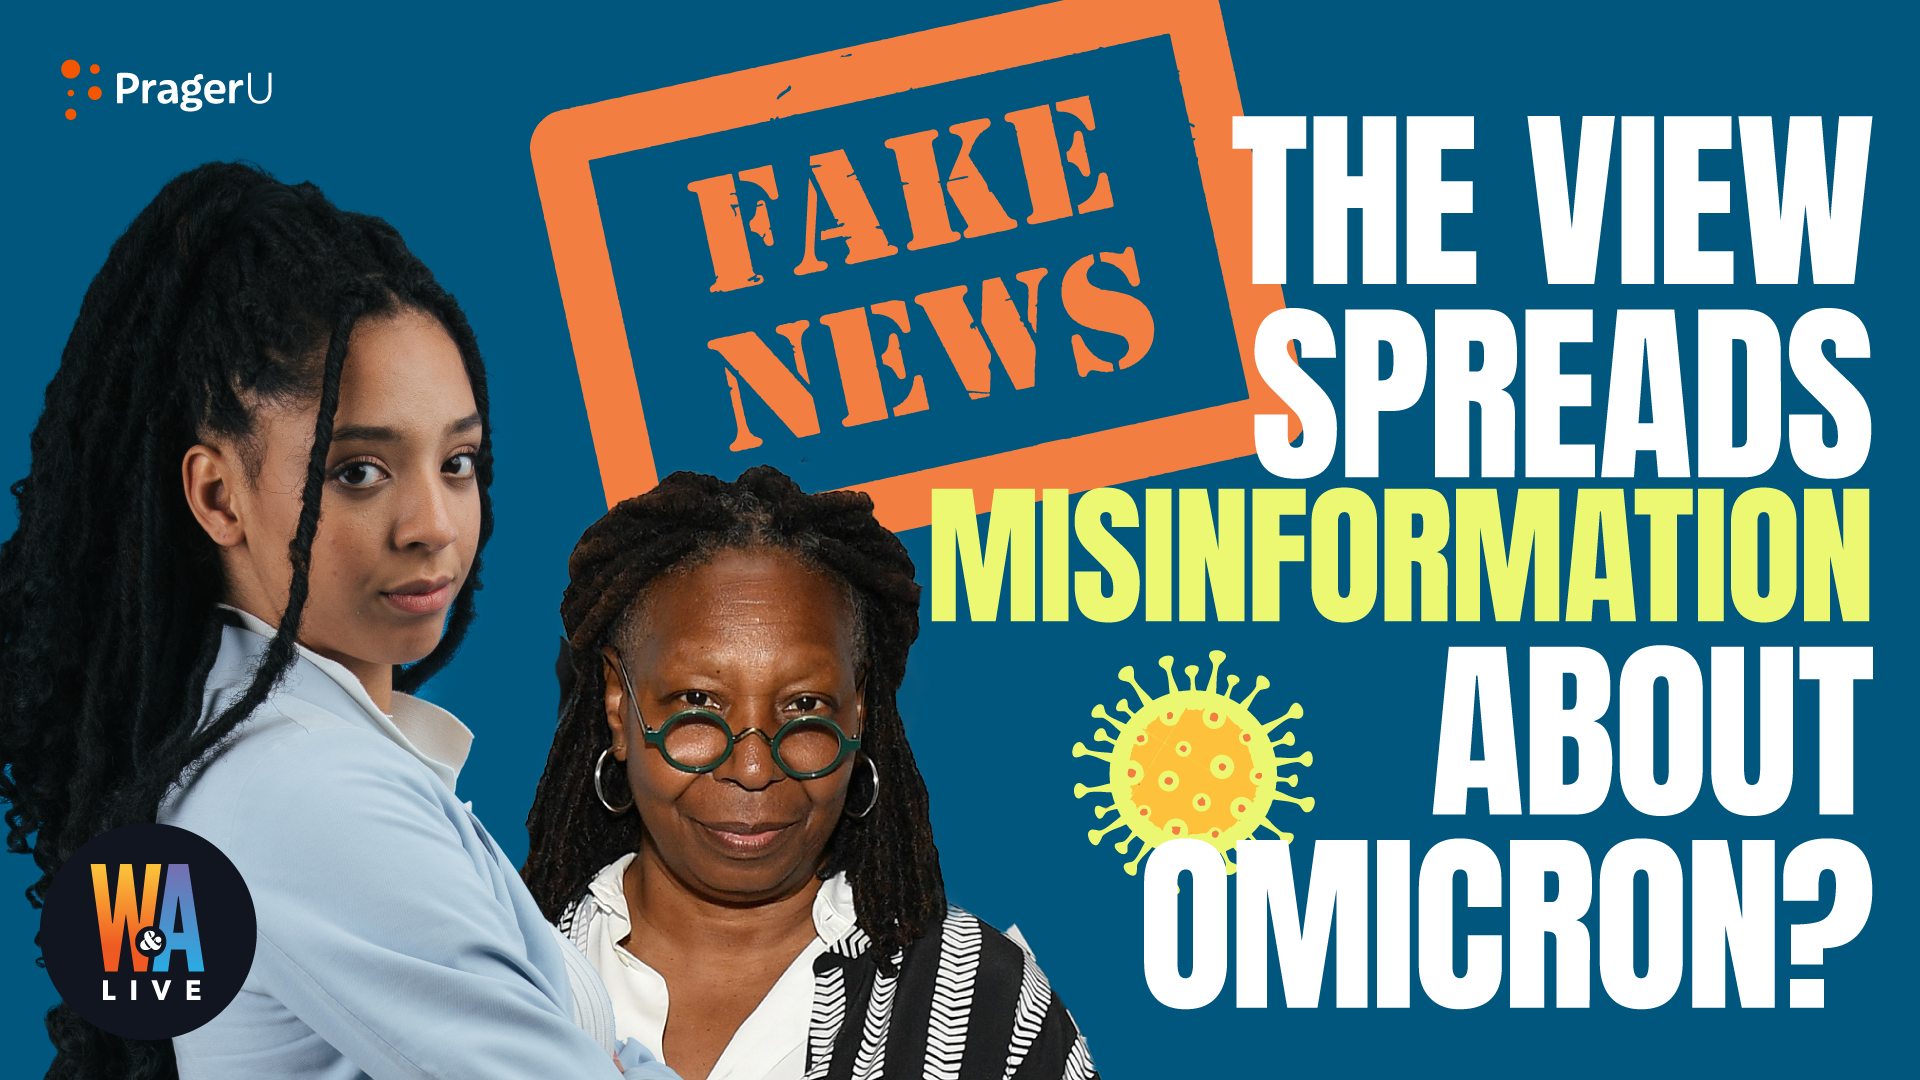 The View Spreads Misinformation about Omicron?